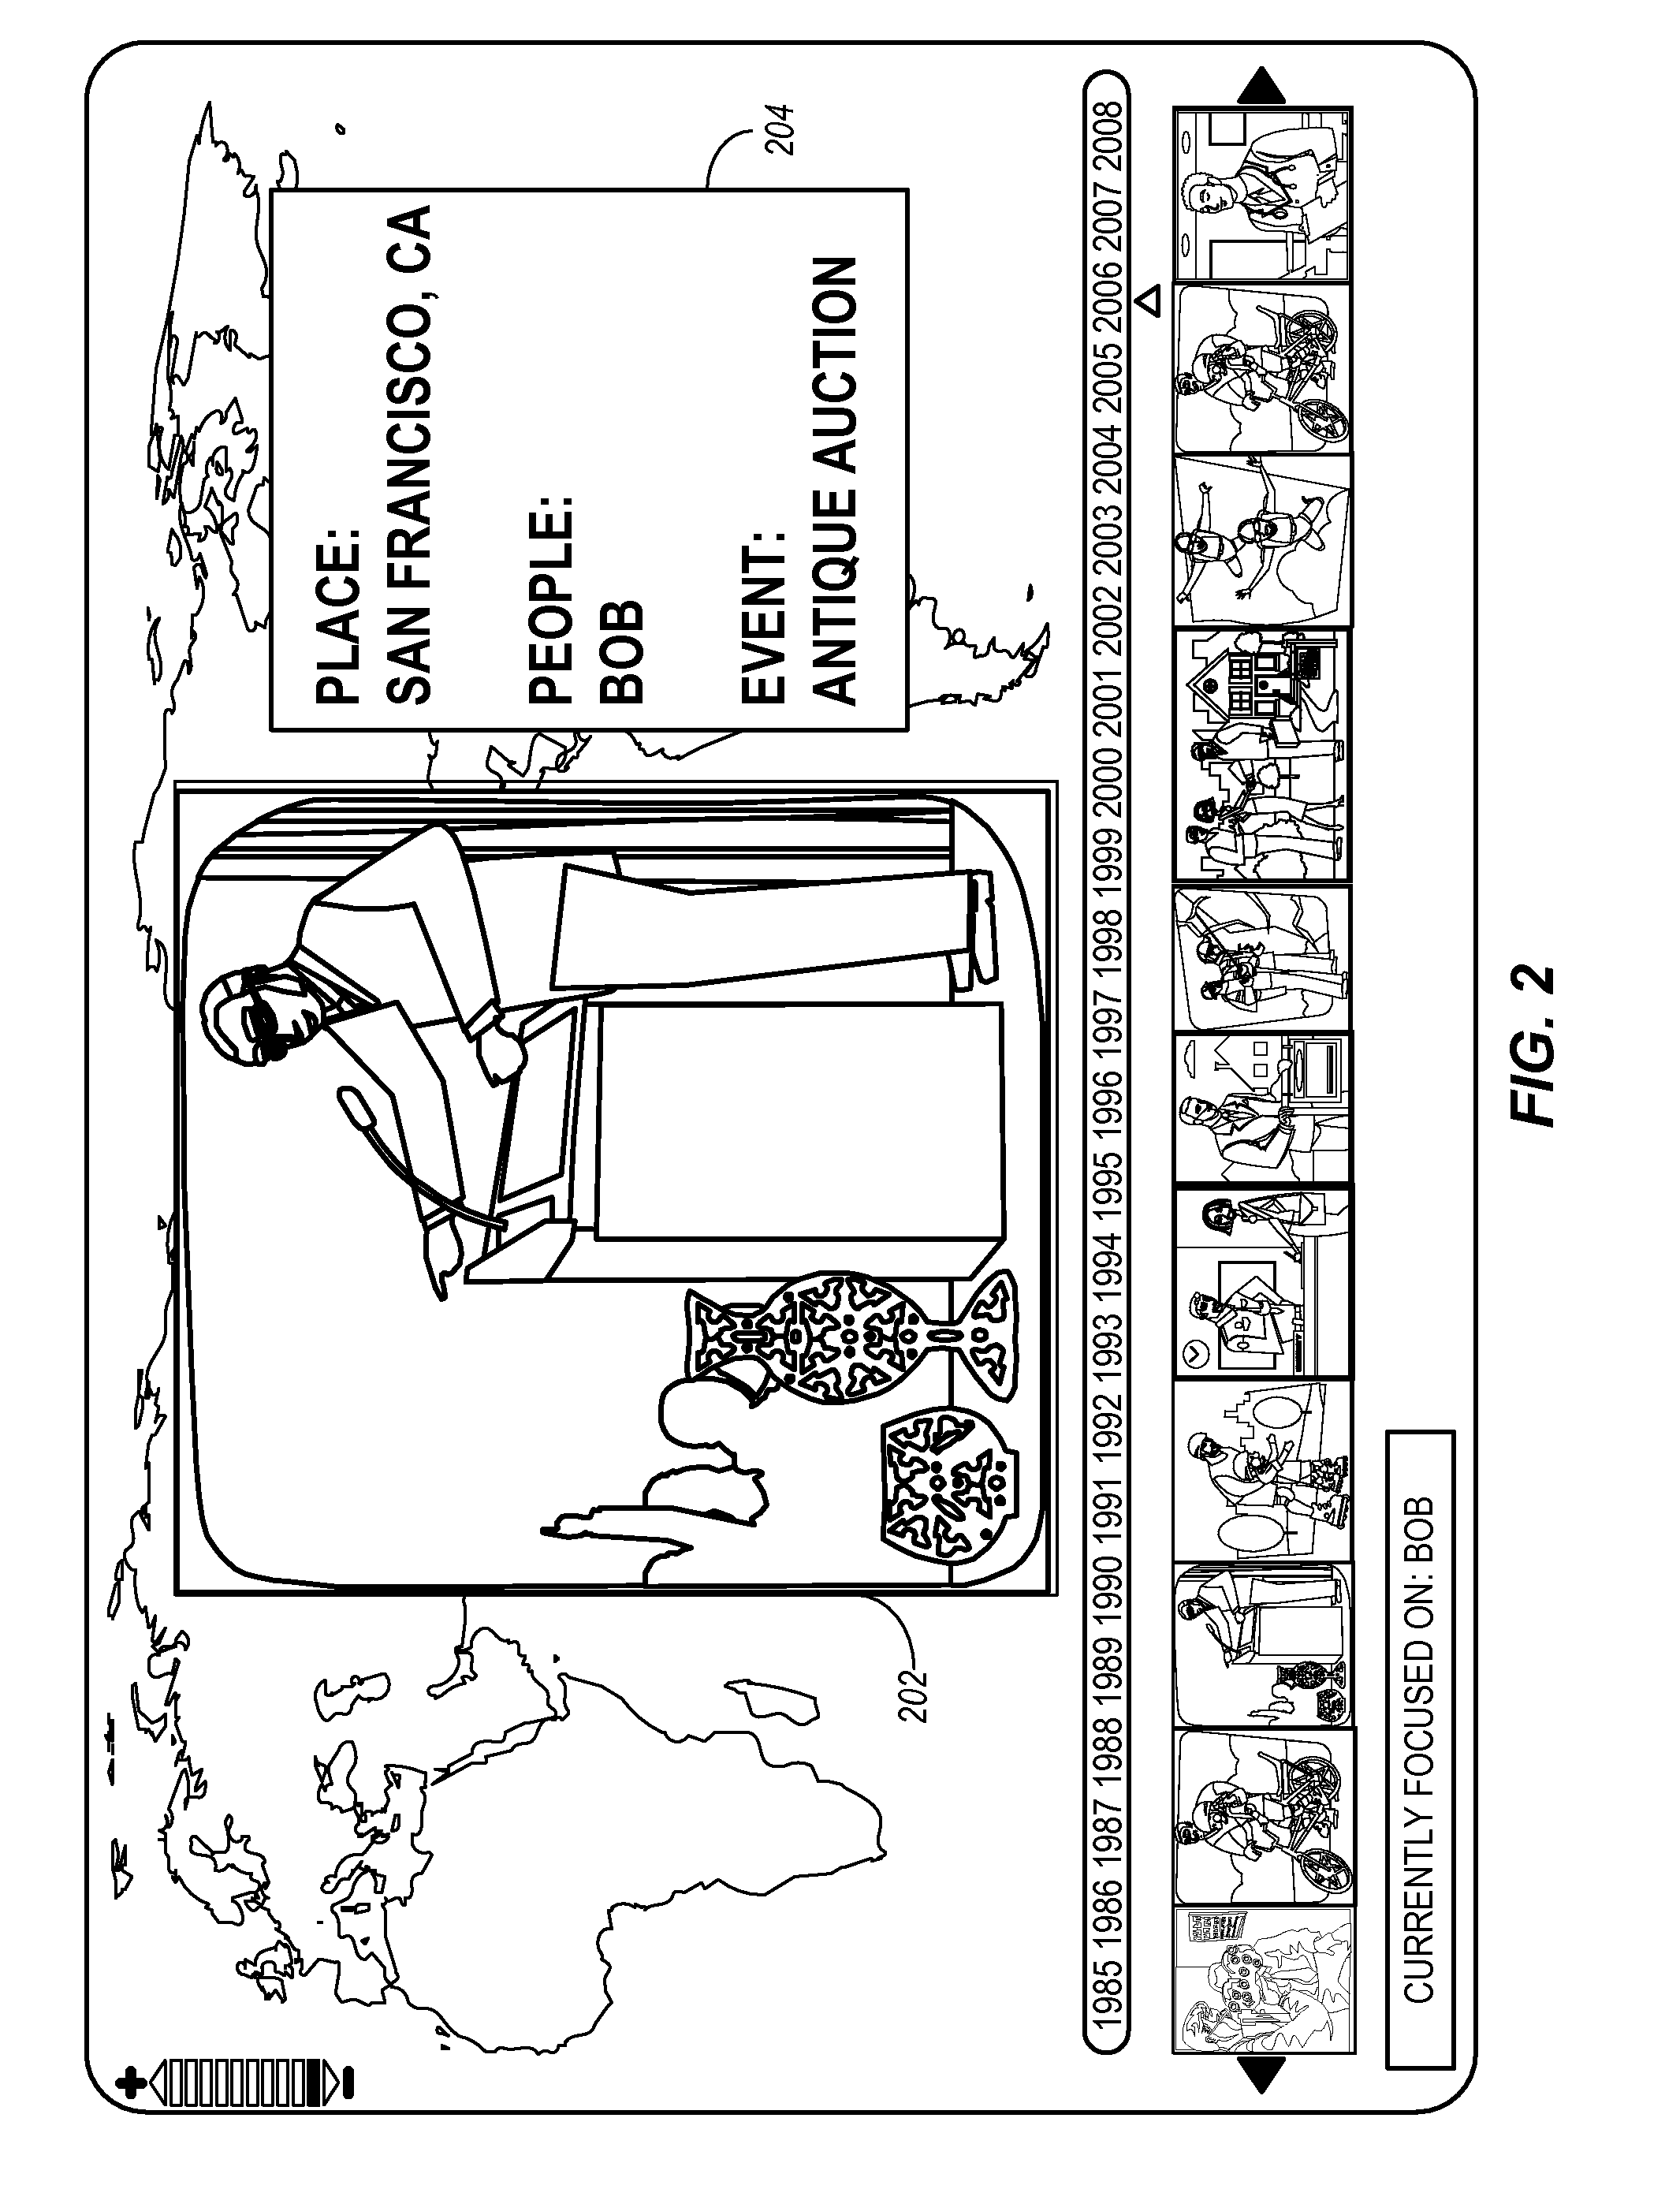 Method and system for traversing digital records with multiple dimensional attributes